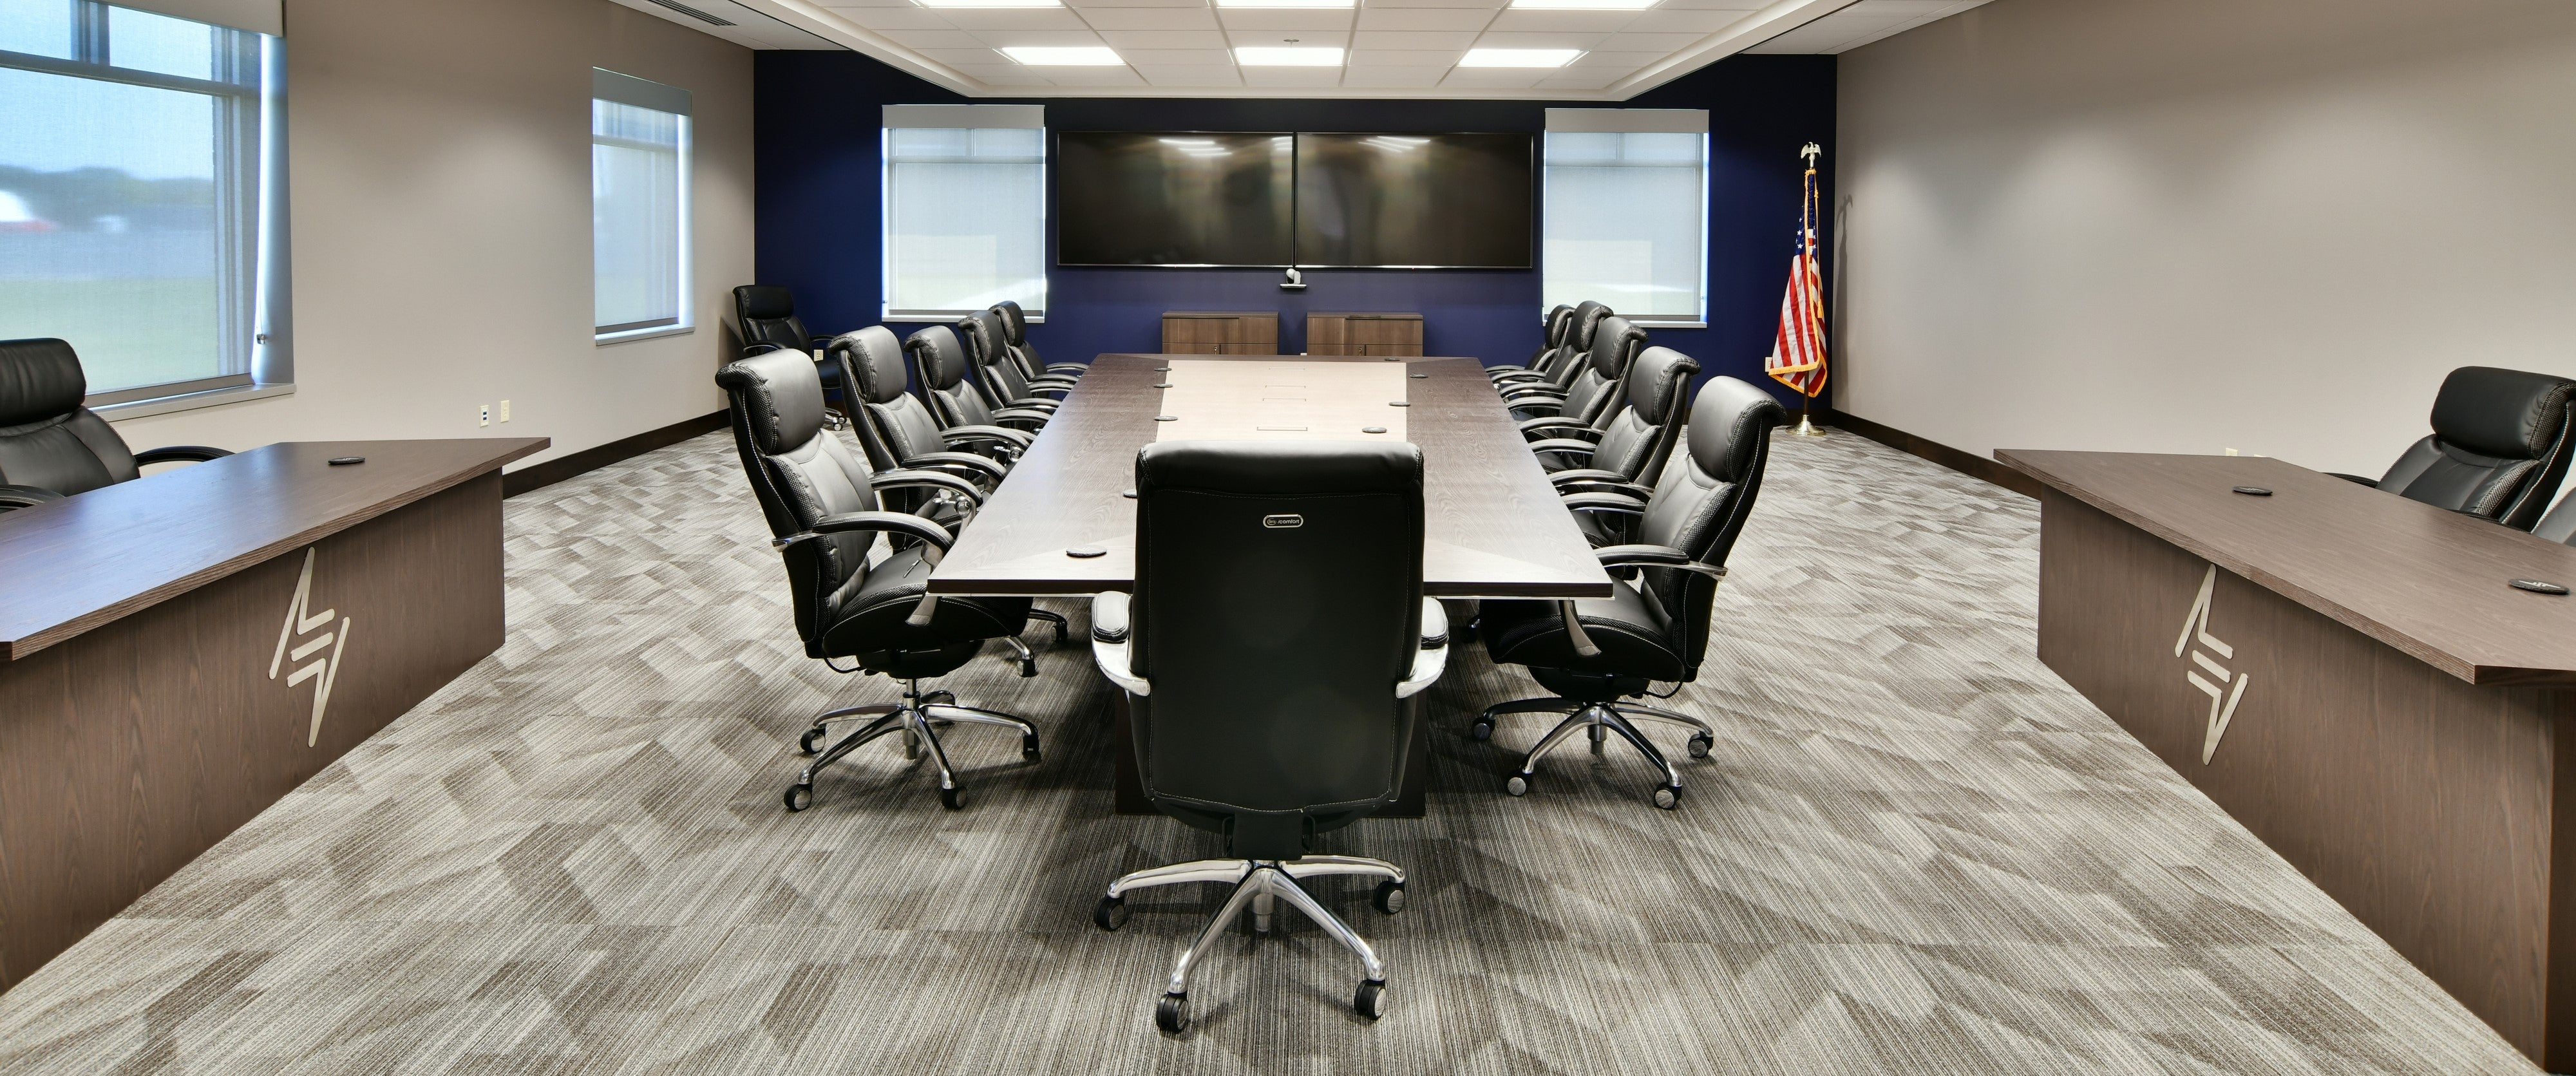 Board Room Cropped